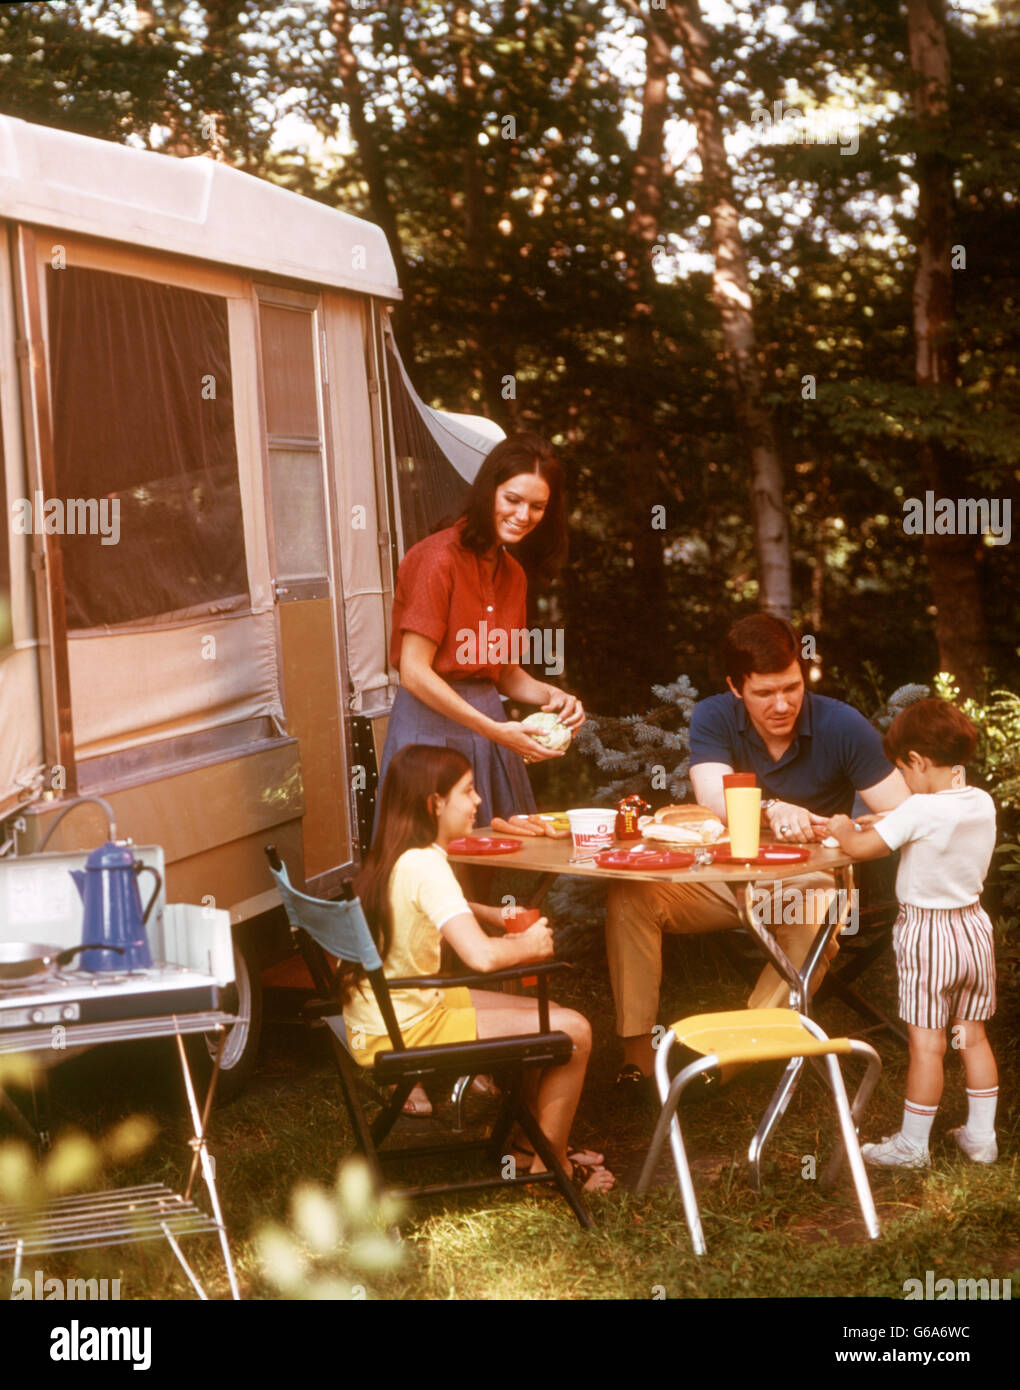 1970s MOTHER SERVING FAMILY MEAL FATHER TWO KIDS OUTSIDE POP-UP CAMPER Stock Photo